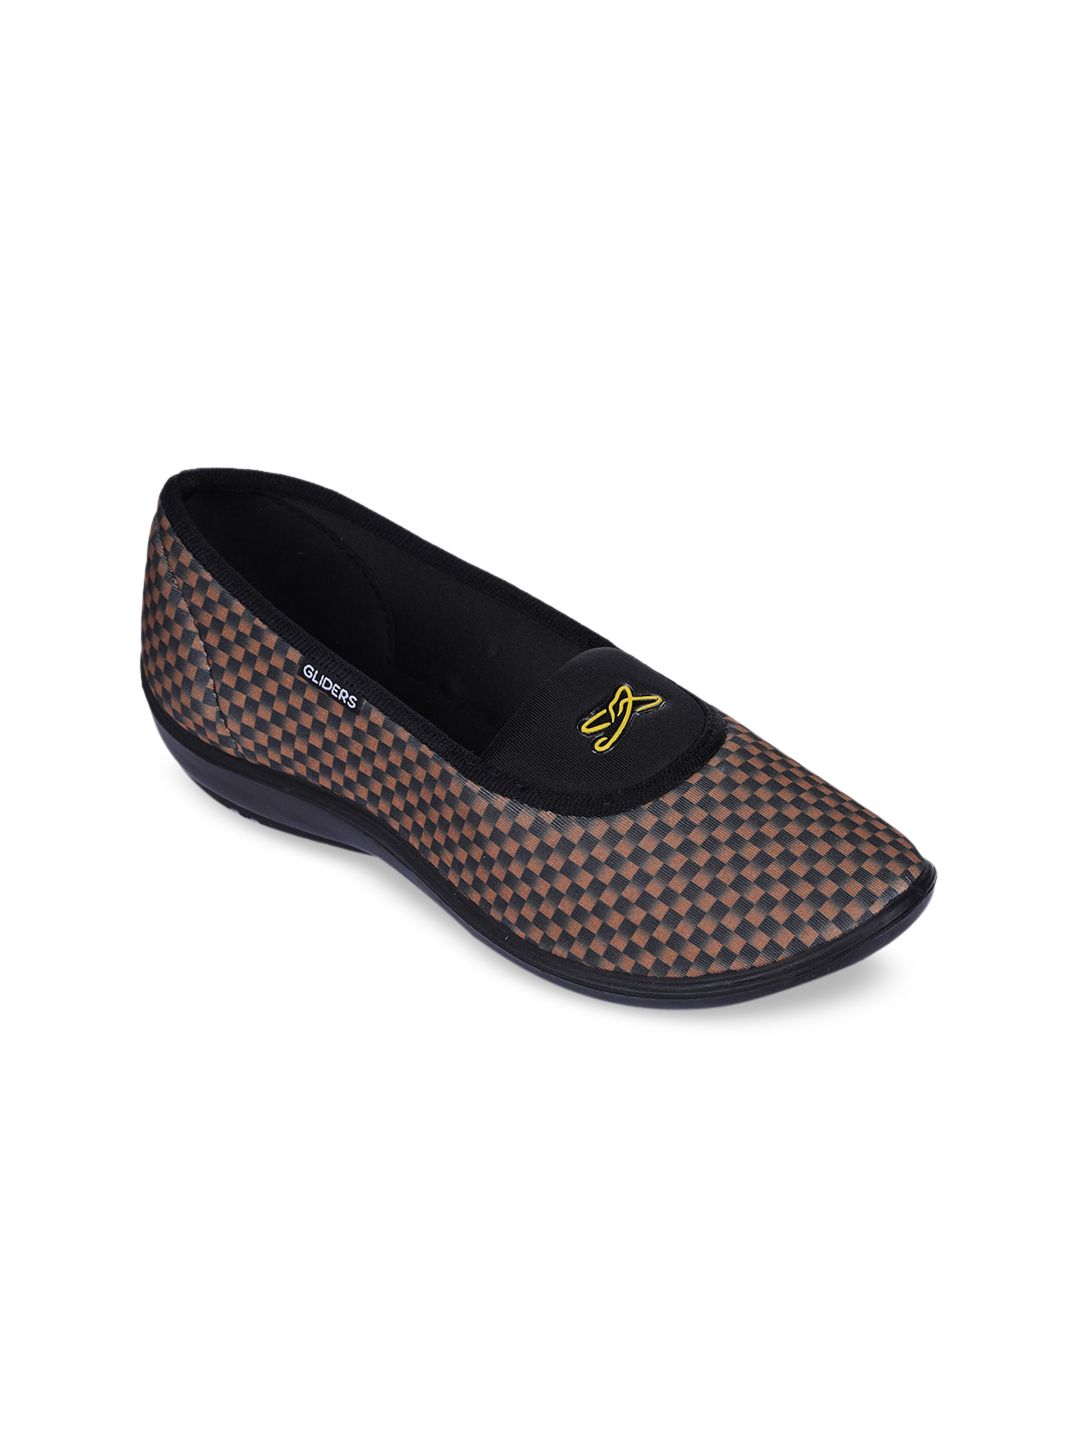 Liberty Women Gold-Toned Printed Ballerinas Price in India